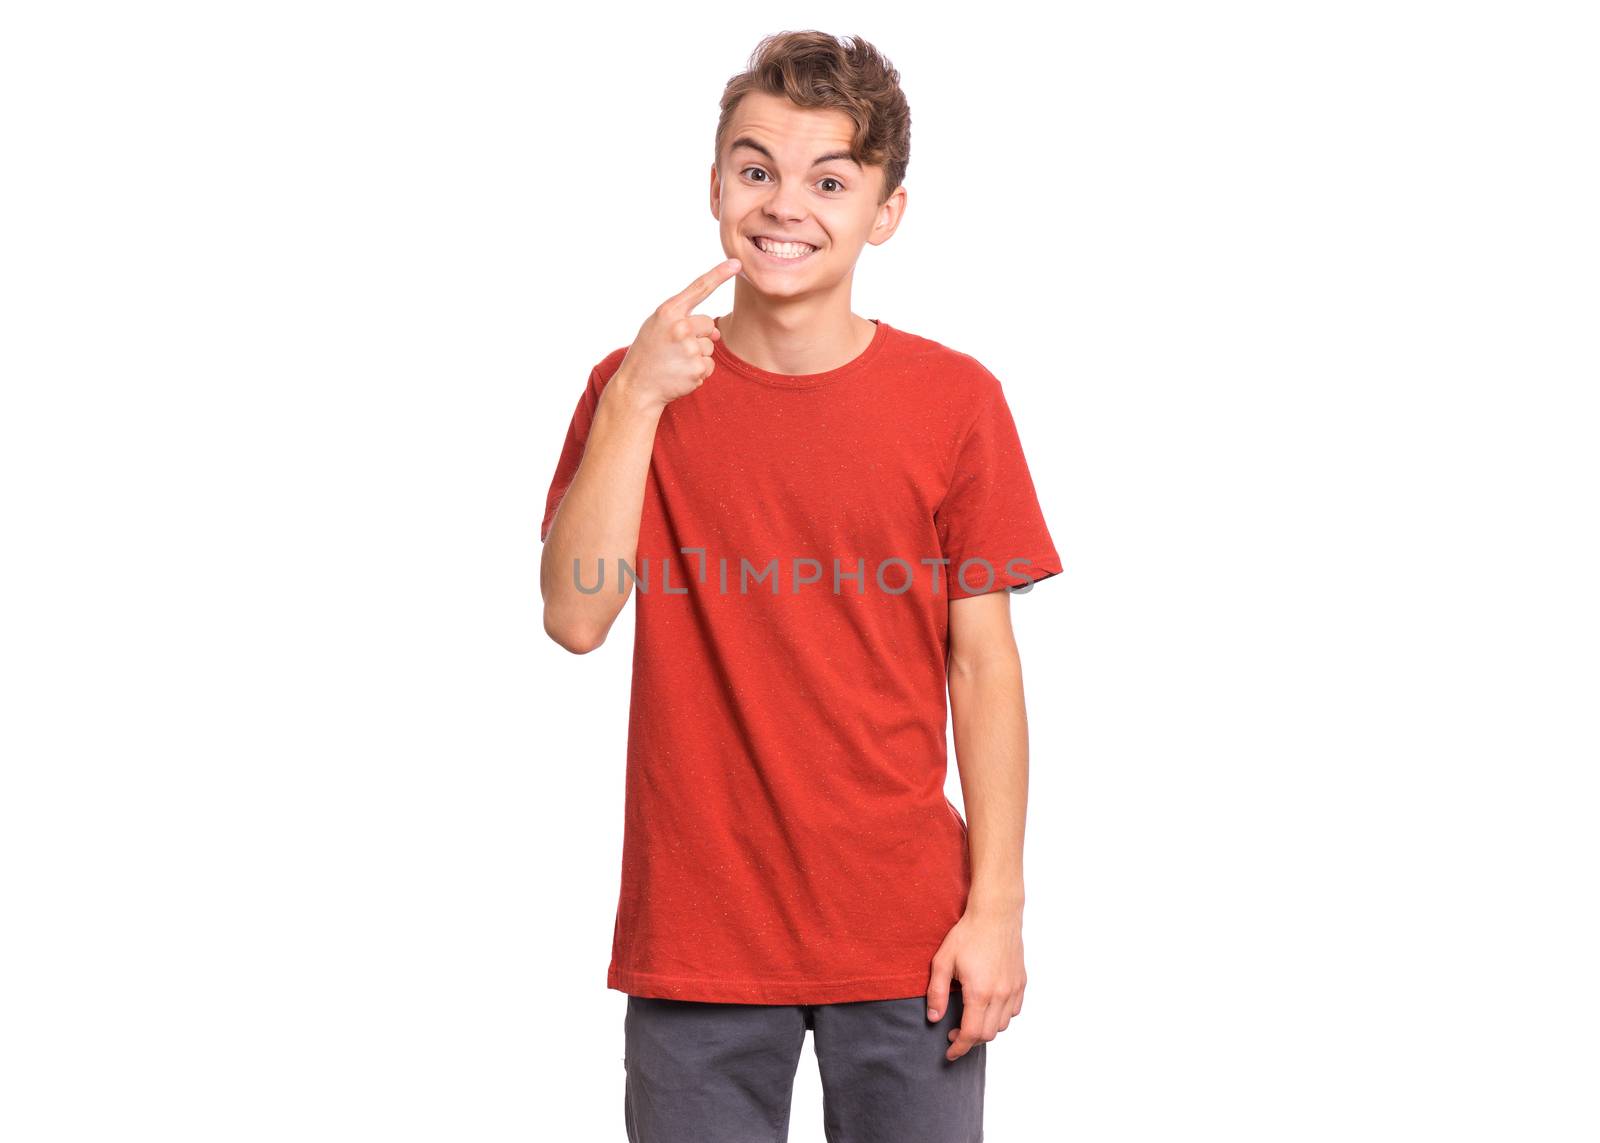 Handsome teen boy showing his to teeth, isolated on white background